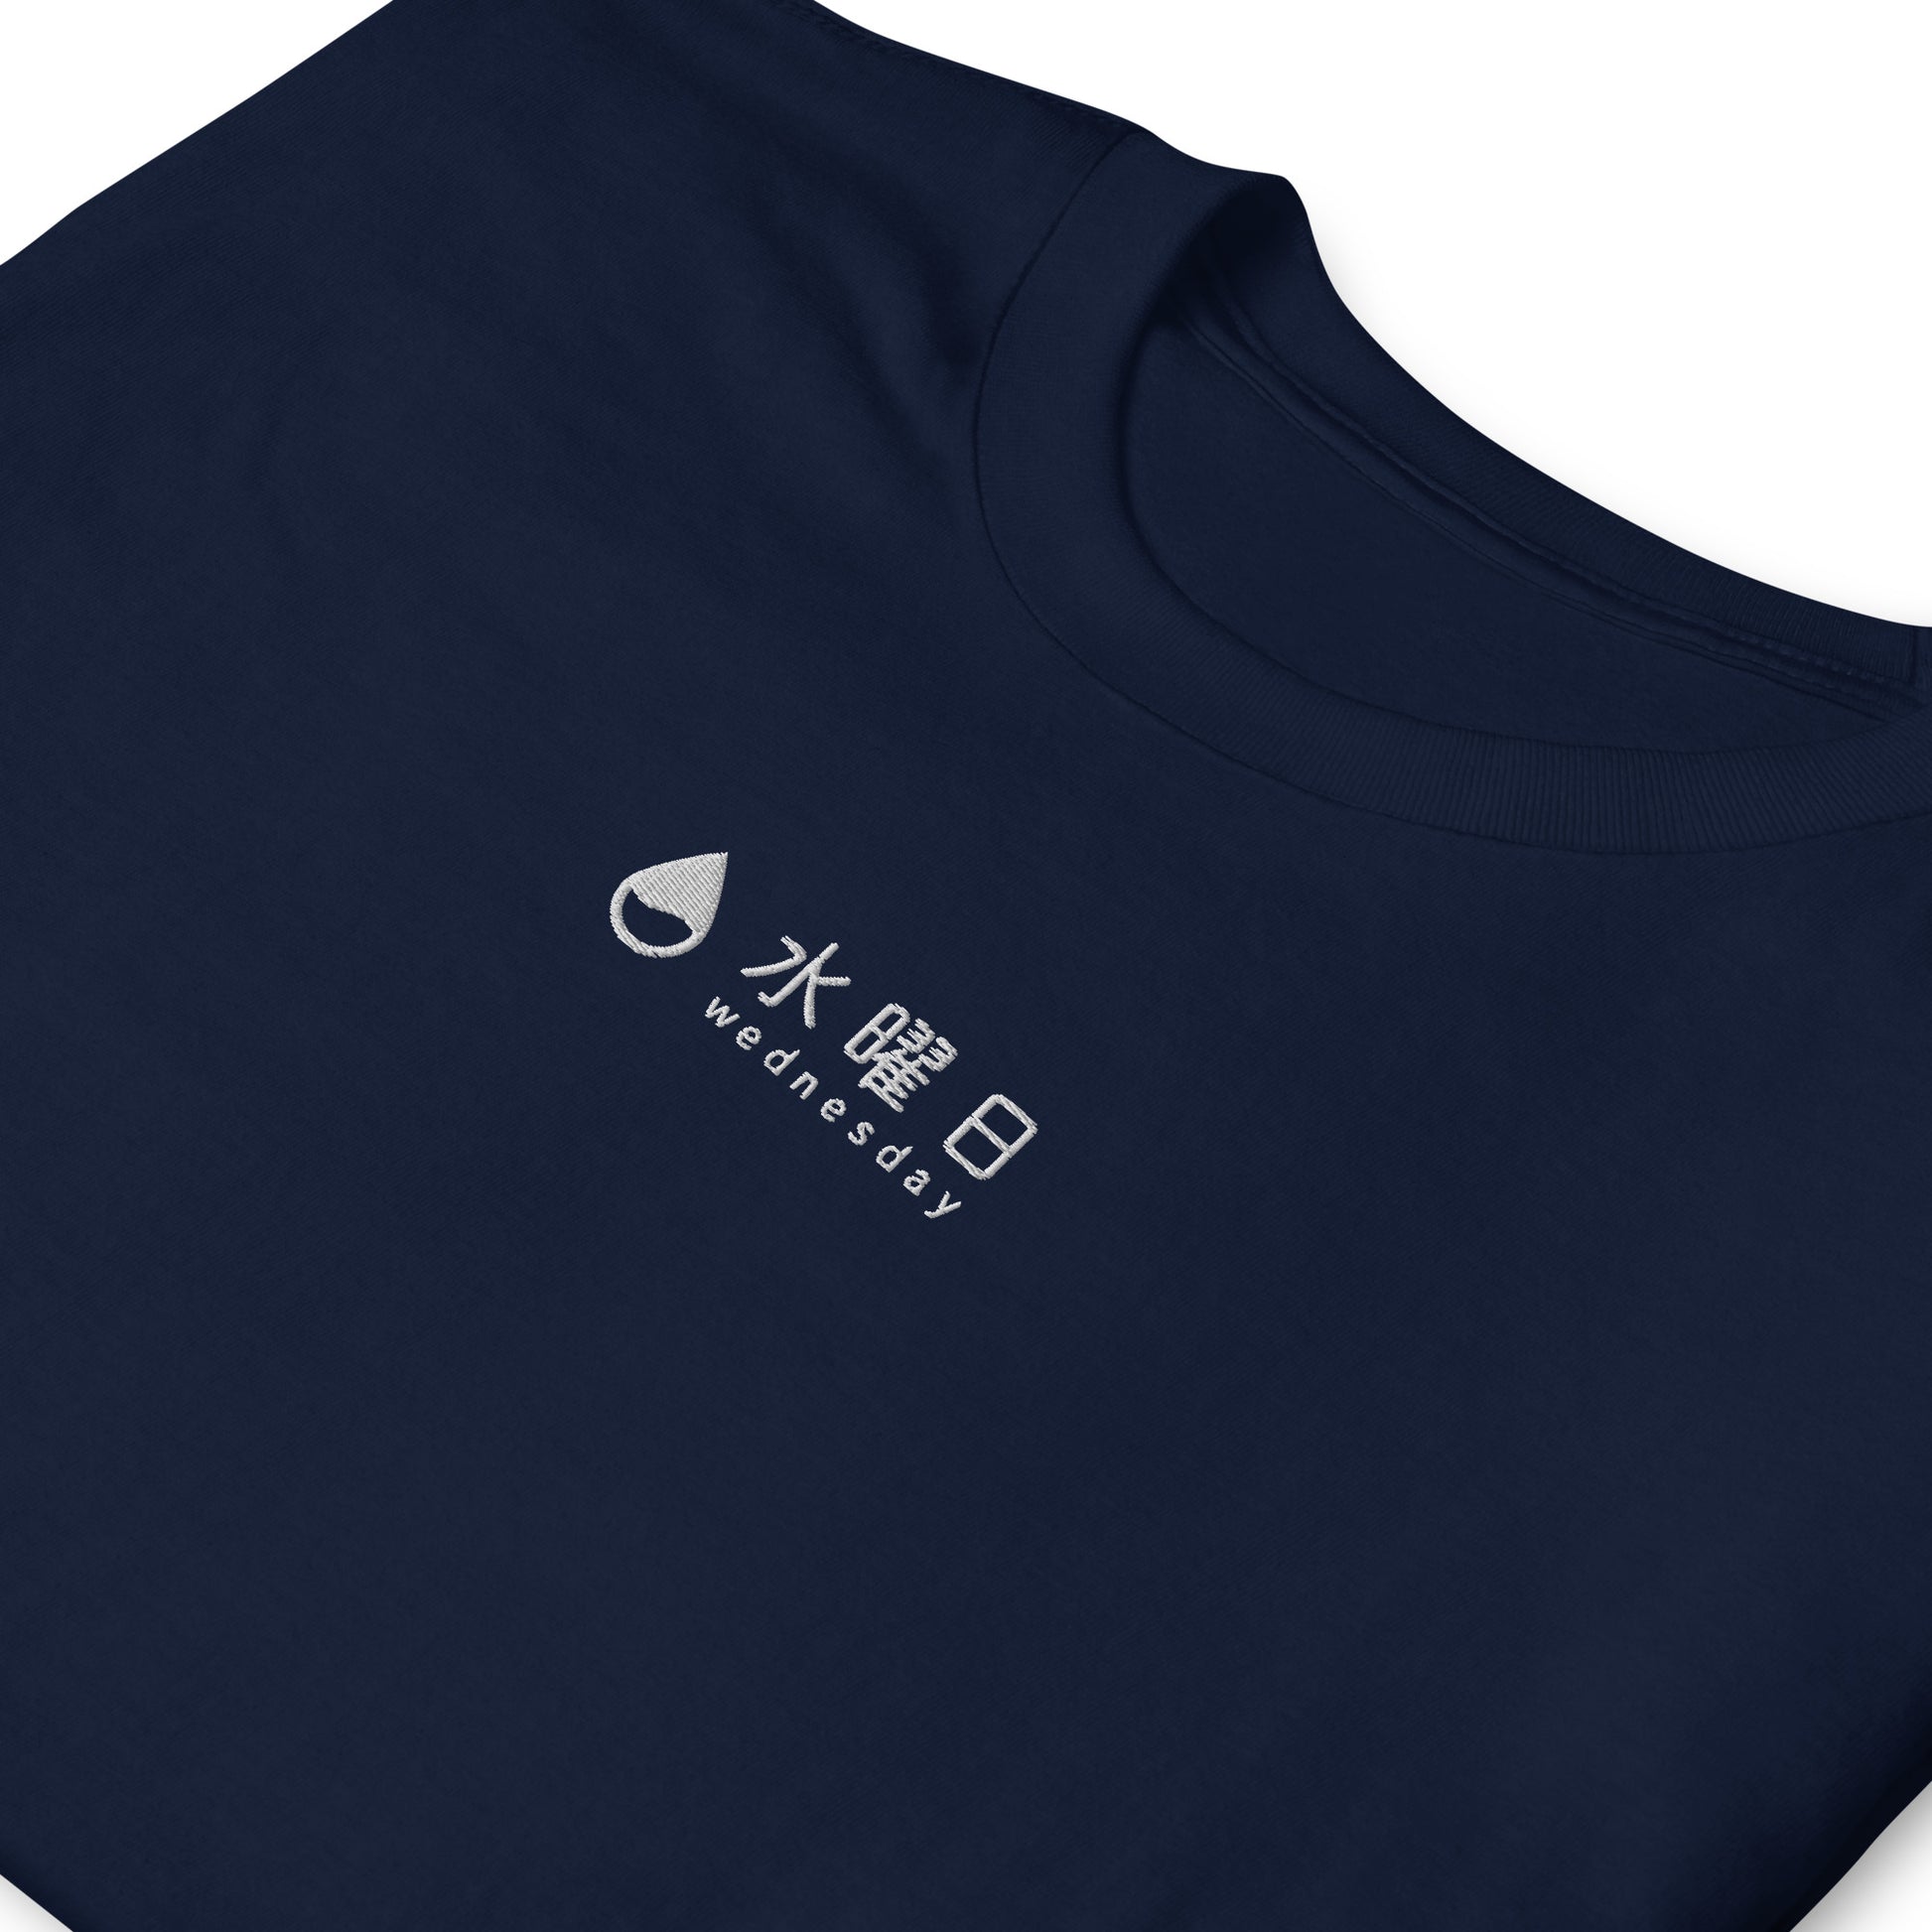 Navy High Quality Tee - Front Design with a white Embroidery "Wednesday" in Japanese and English